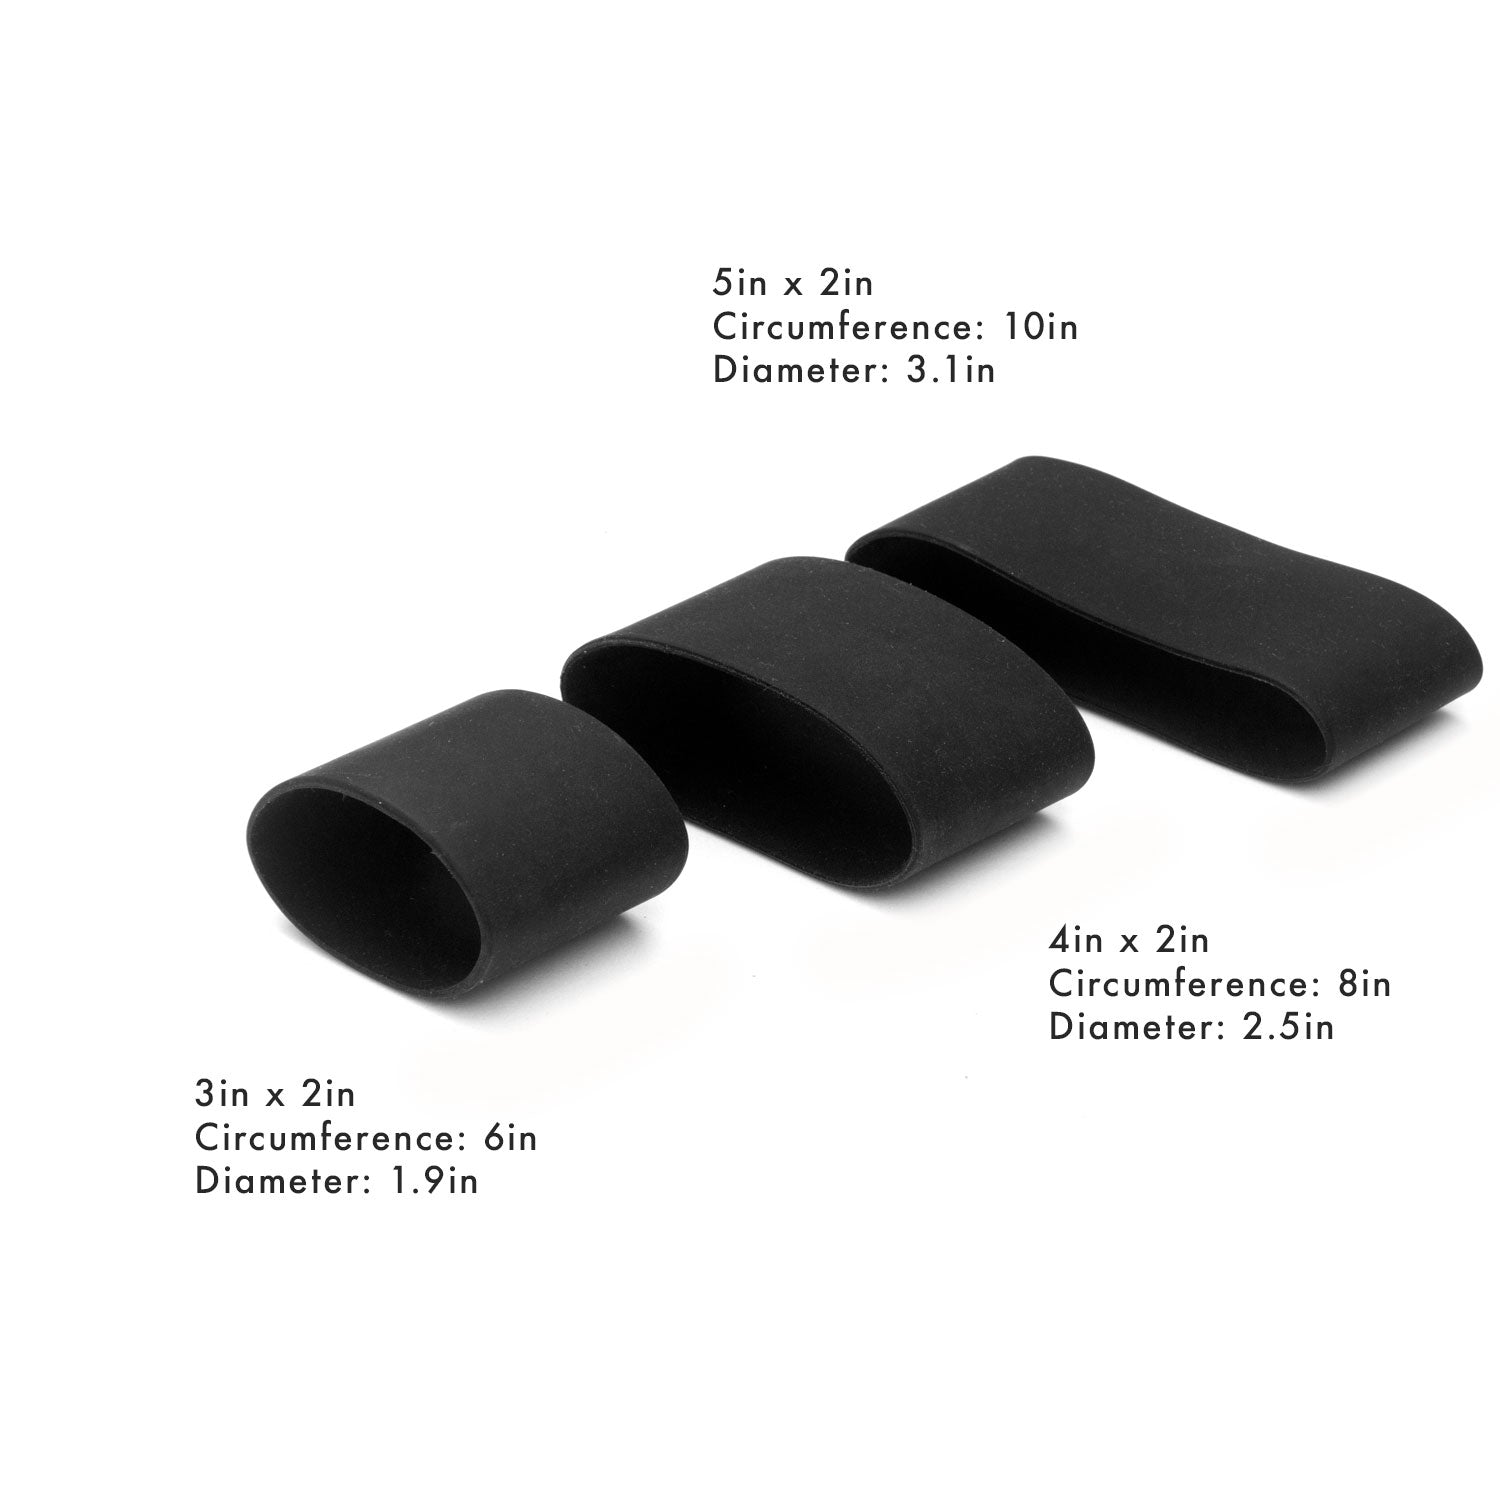 Grifiti Band Joes Silicone Grip Bands 3 Pack Assorted Sizes Mugs Cups Bottles Knobs Dumbbells, Black